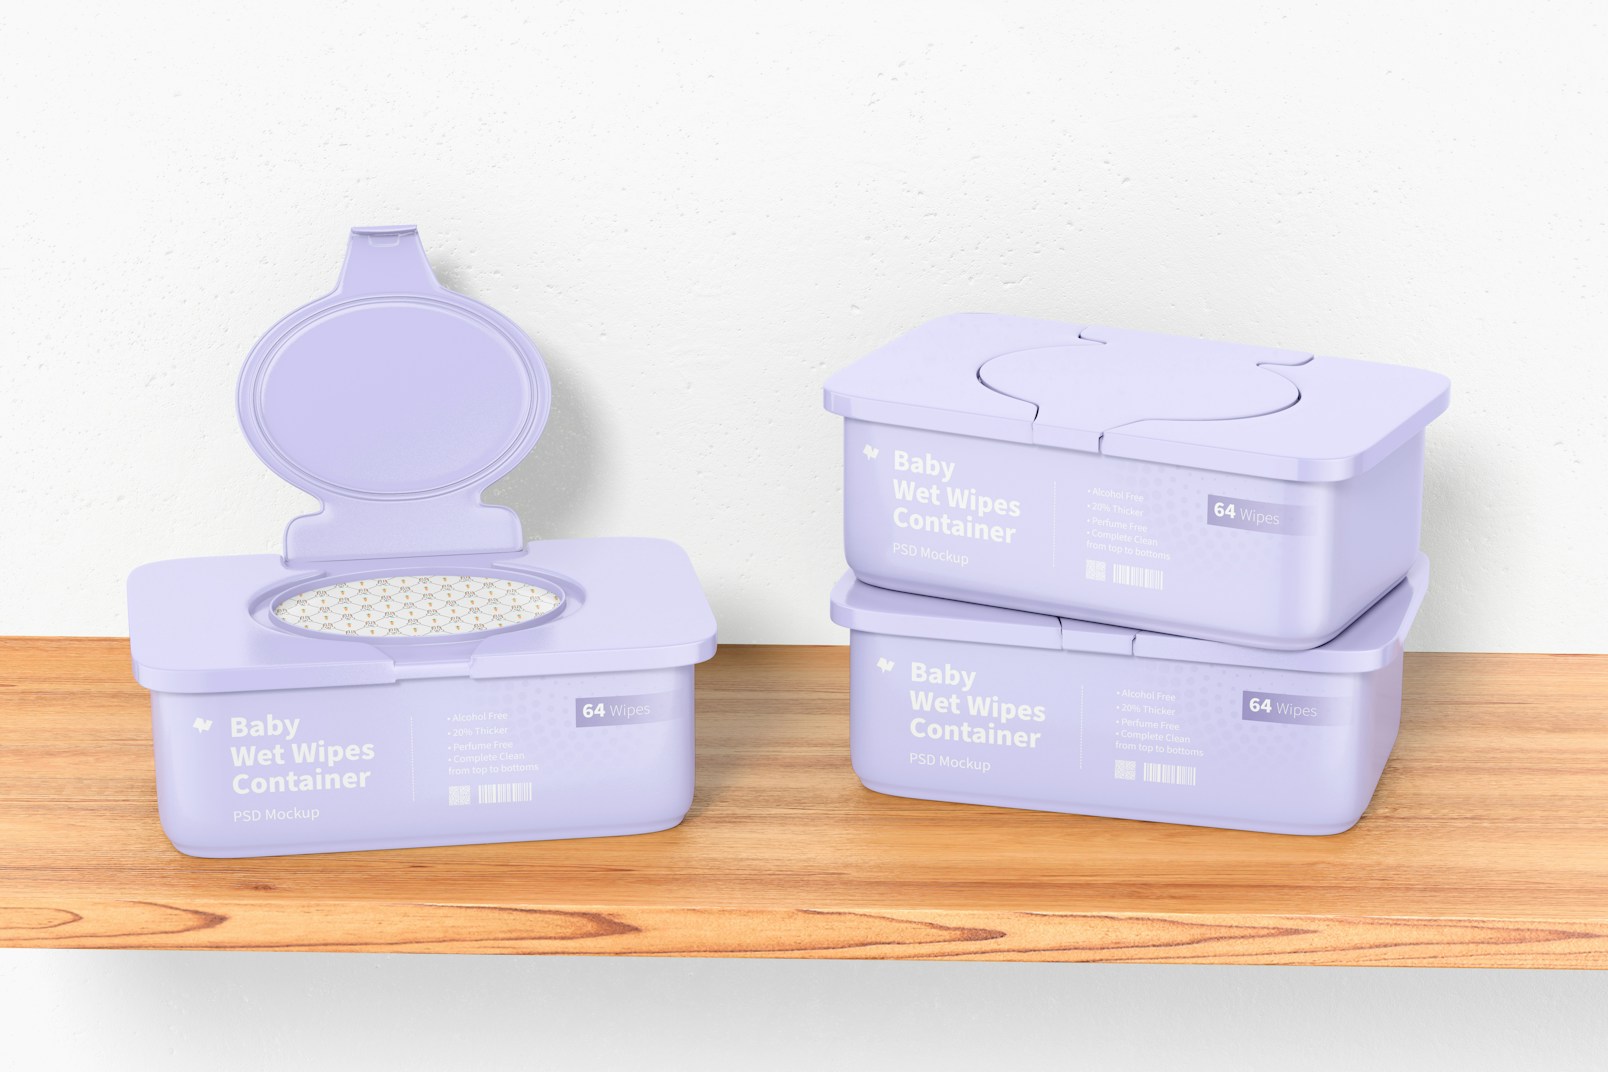 Baby Wet Wipes Containers Set Mockup